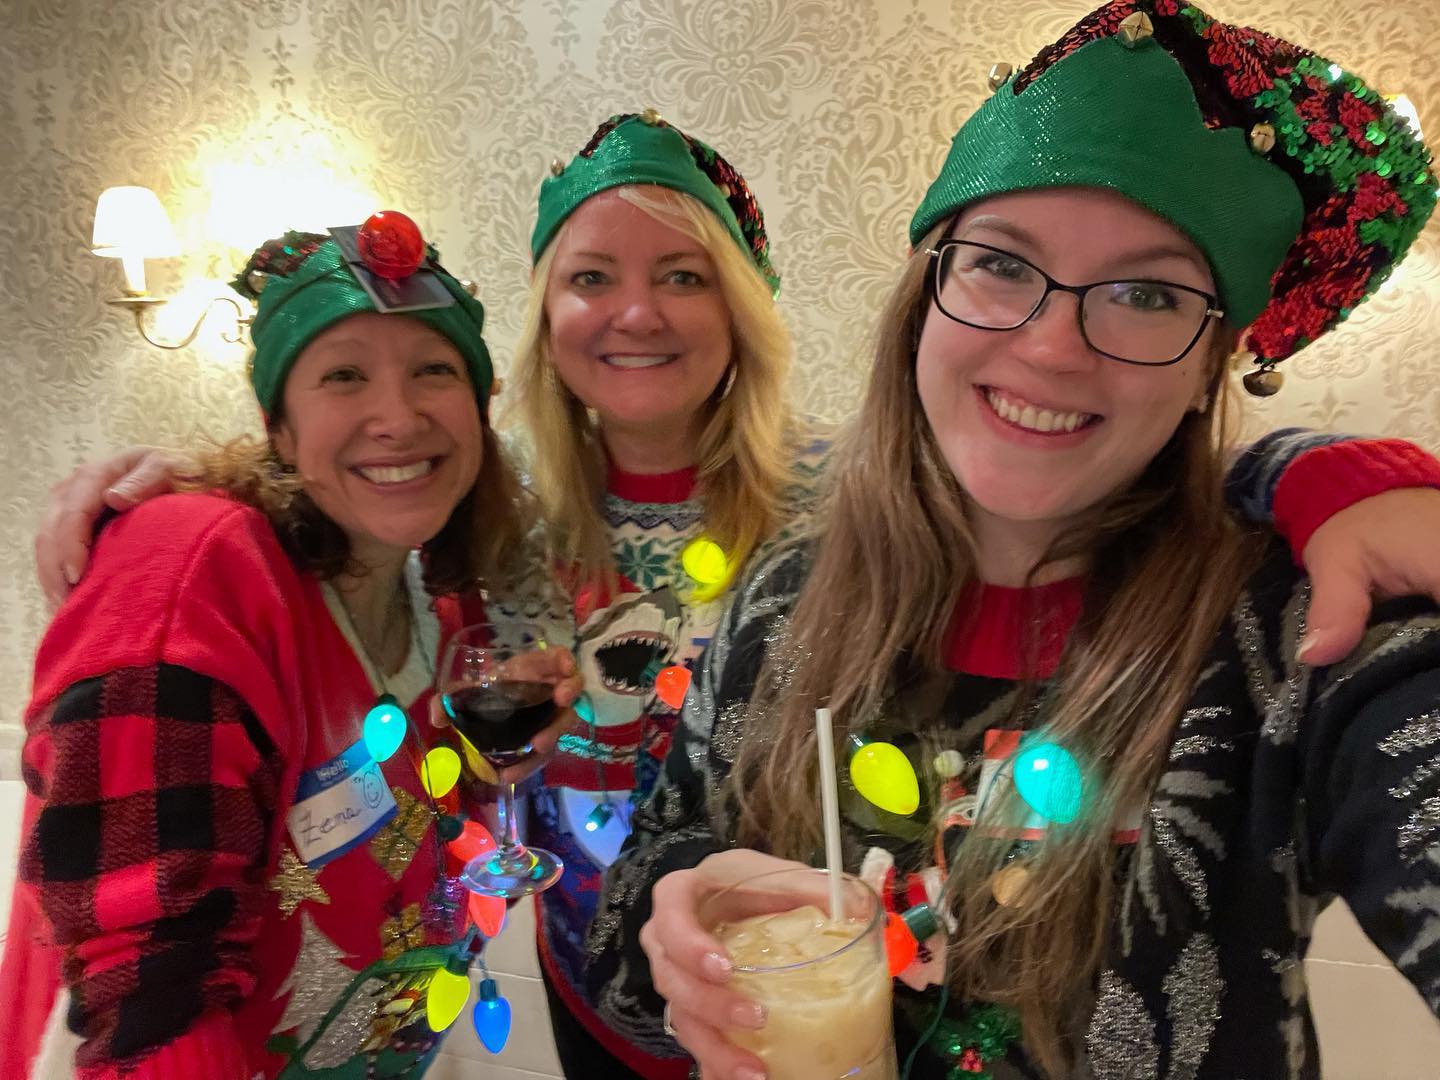 Oh the fun we had! @ardentstaffing Holyoke team had a great time rocking the ugly sweaters at the the @erc5chamber  and @wrc_chamber event.